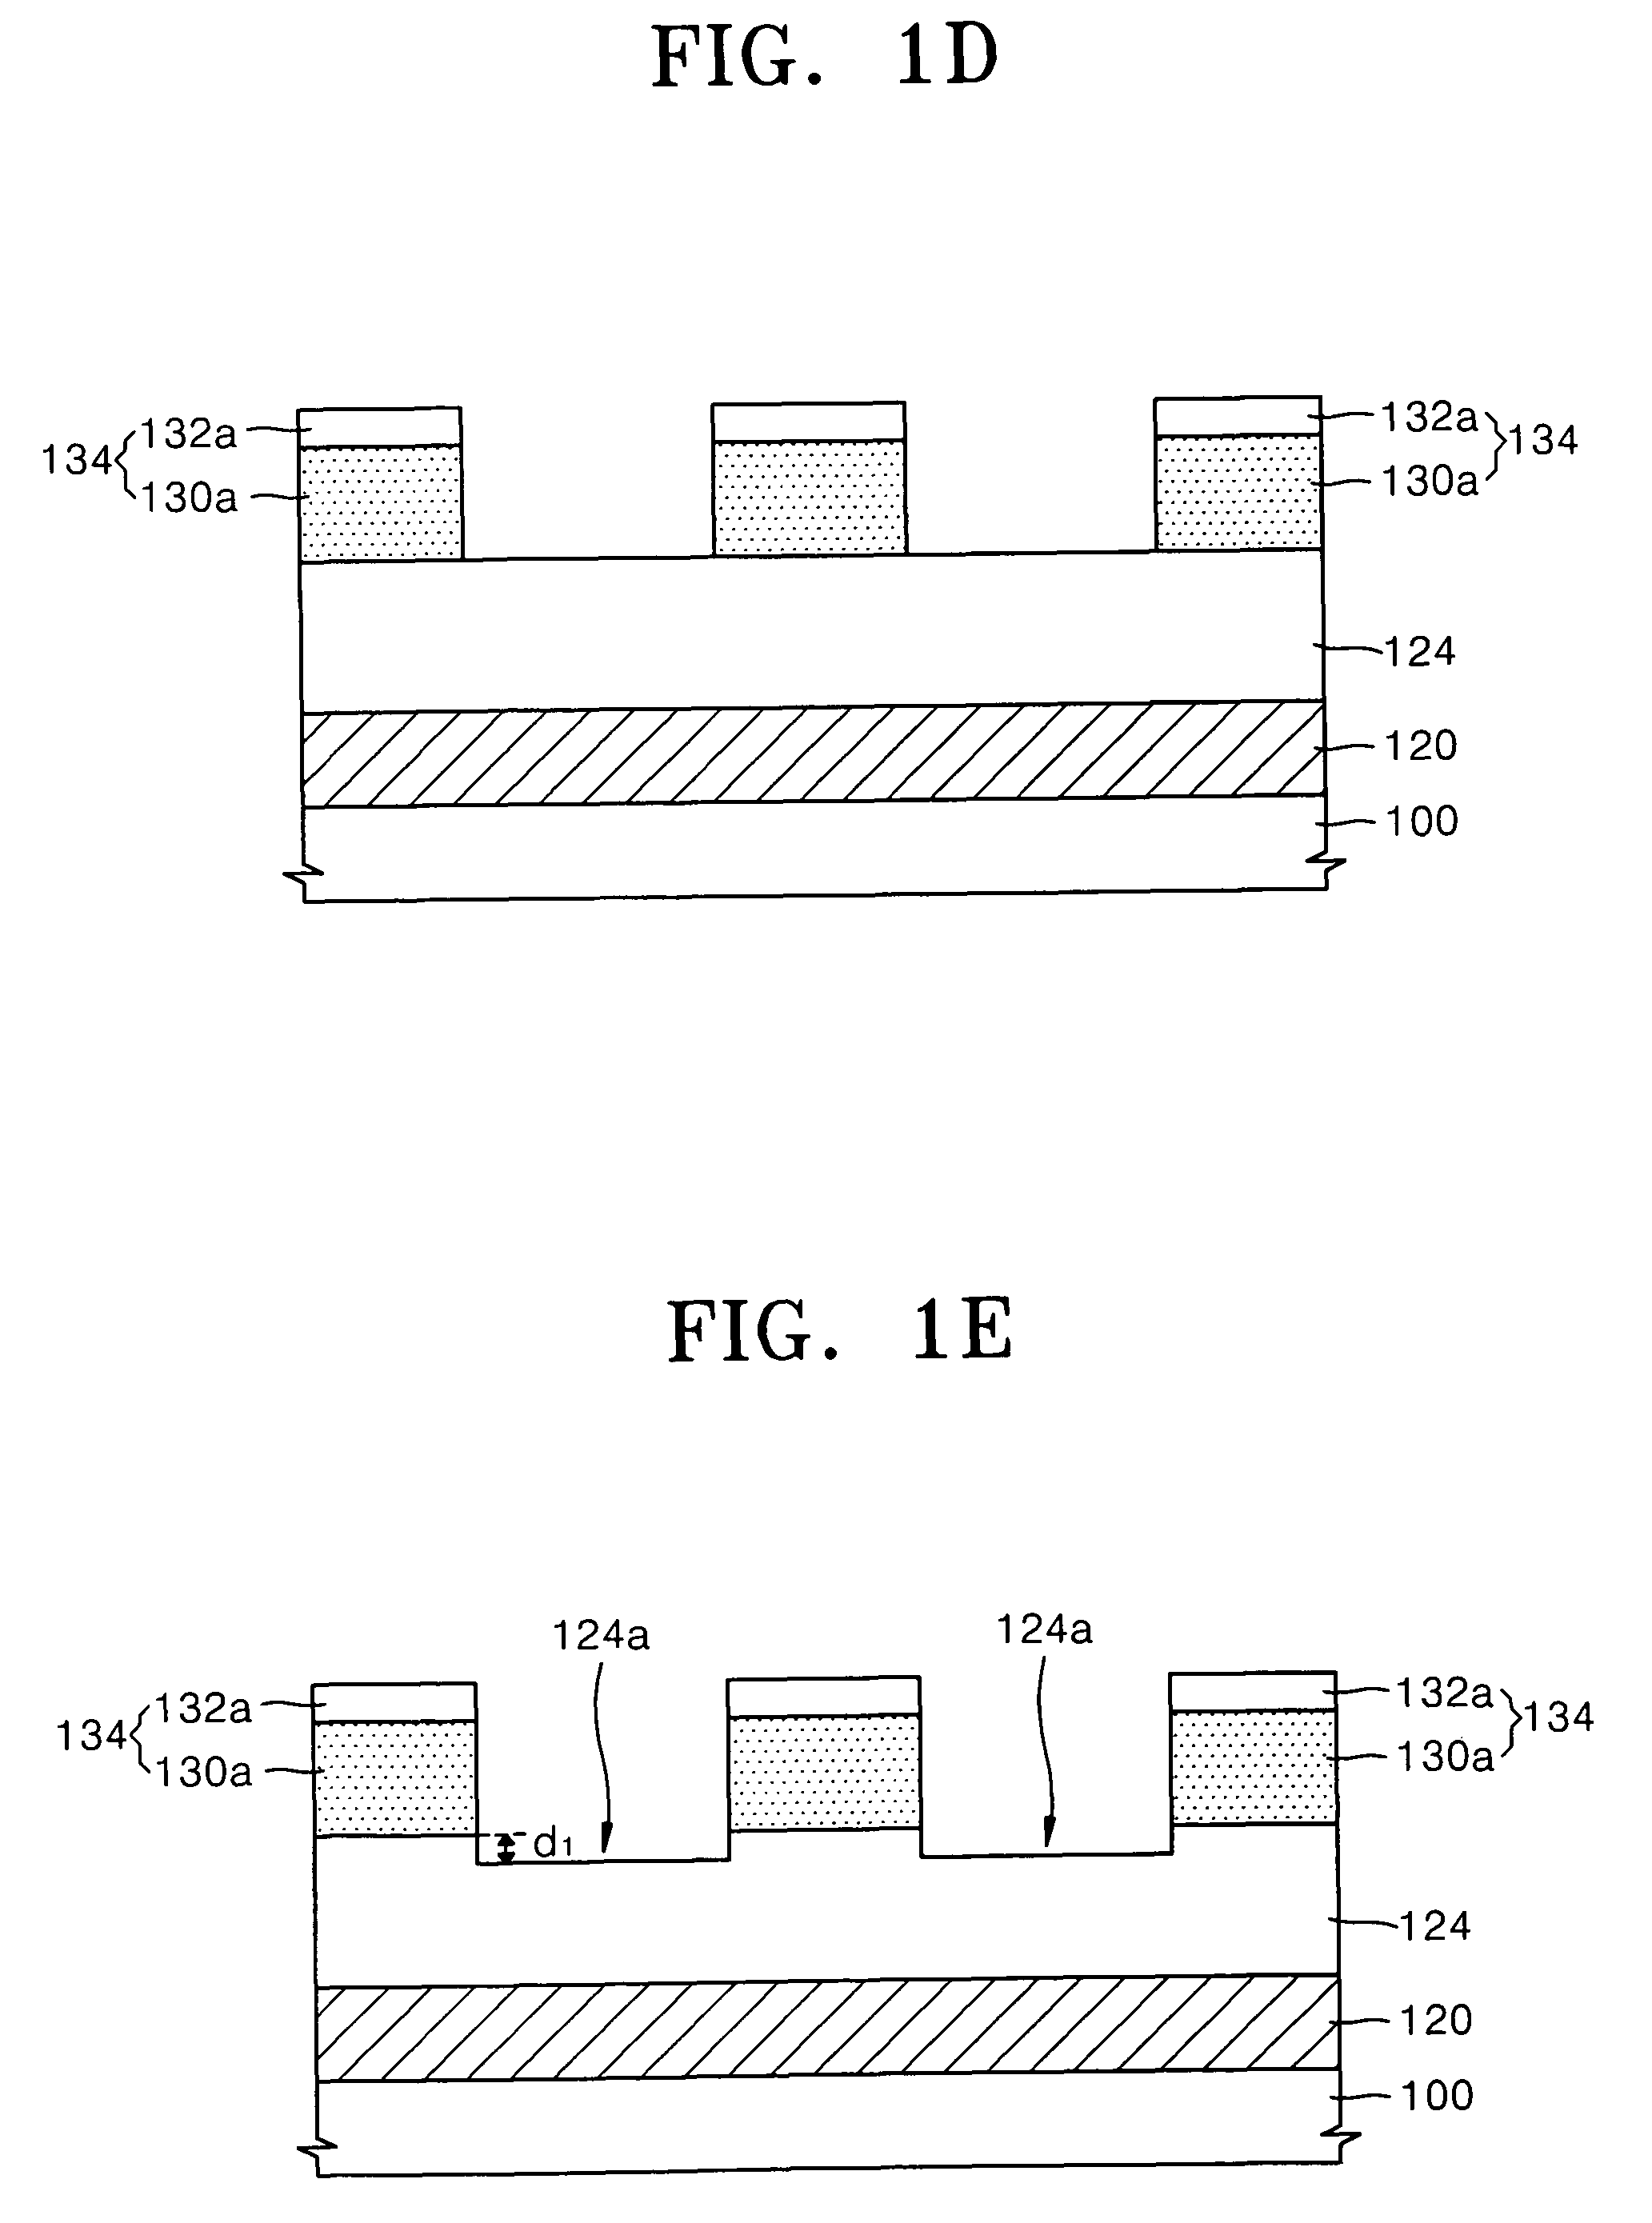 Method of forming fine patterns of semiconductor devices using double patterning